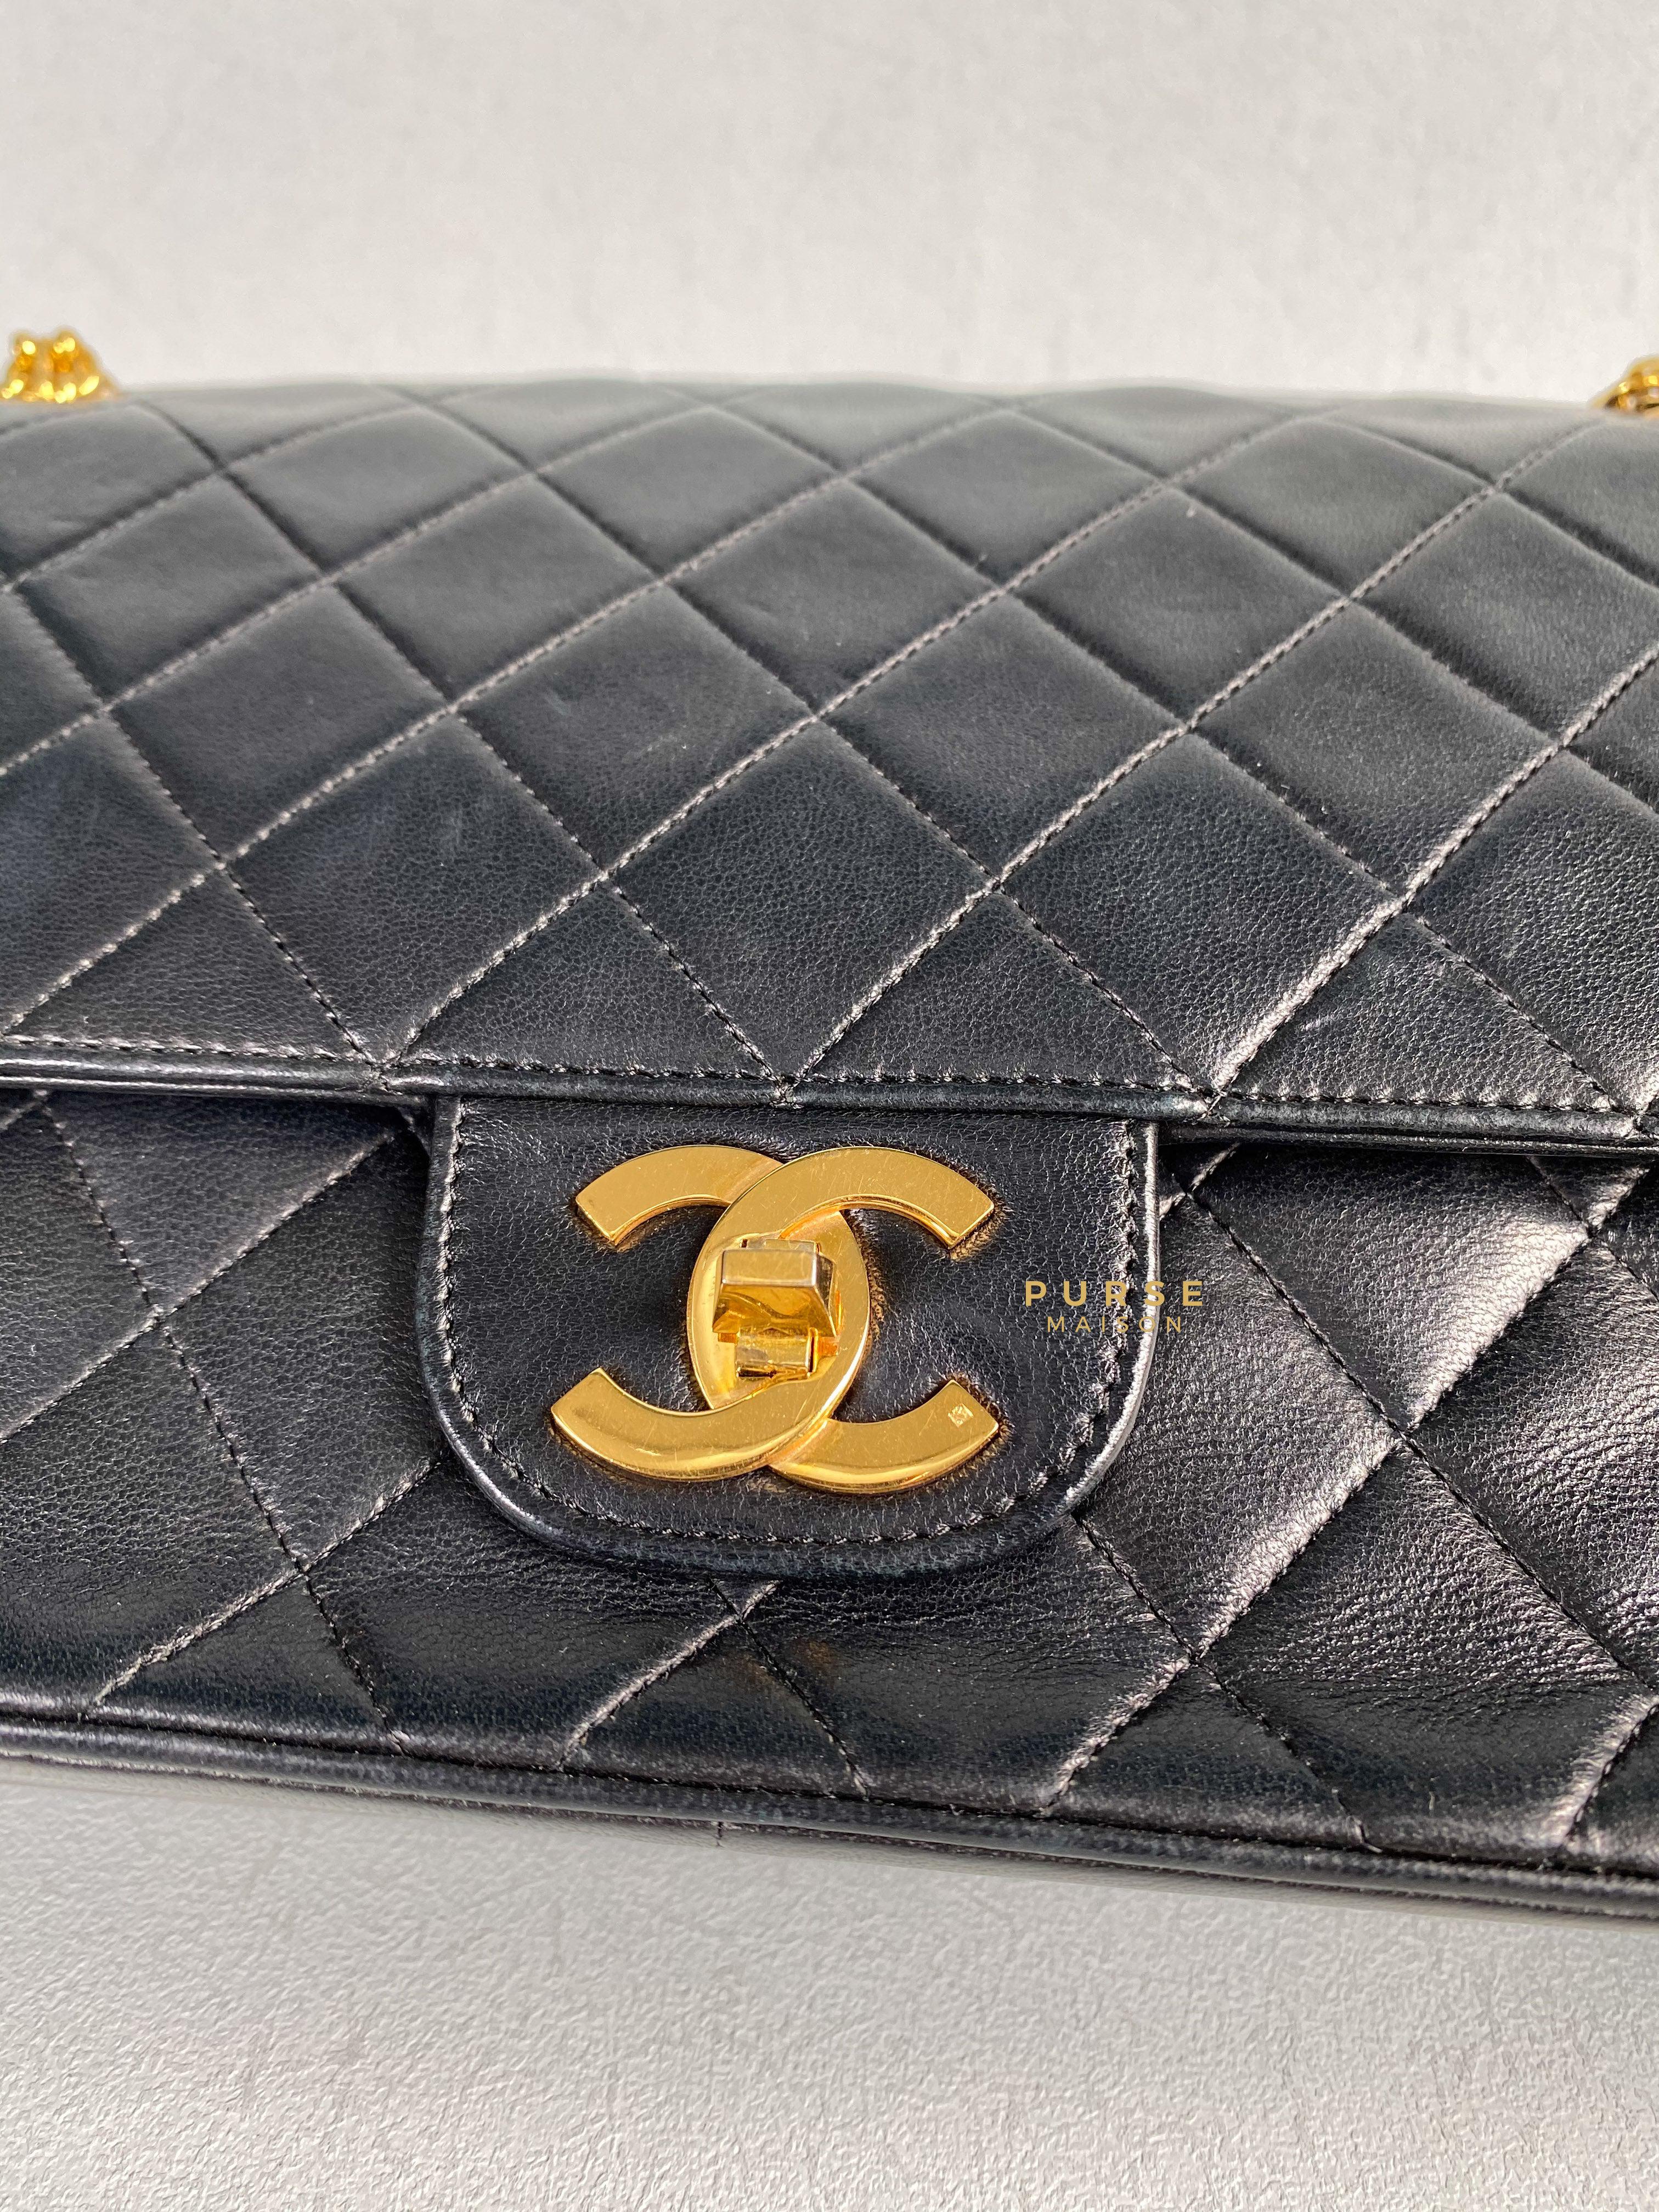 Chanel Vintage Medium Classic Flap in Lambskin Bijoux Chain and 24k Gold Hardware Pre Series 0 | Purse Maison Luxury Bags Shop